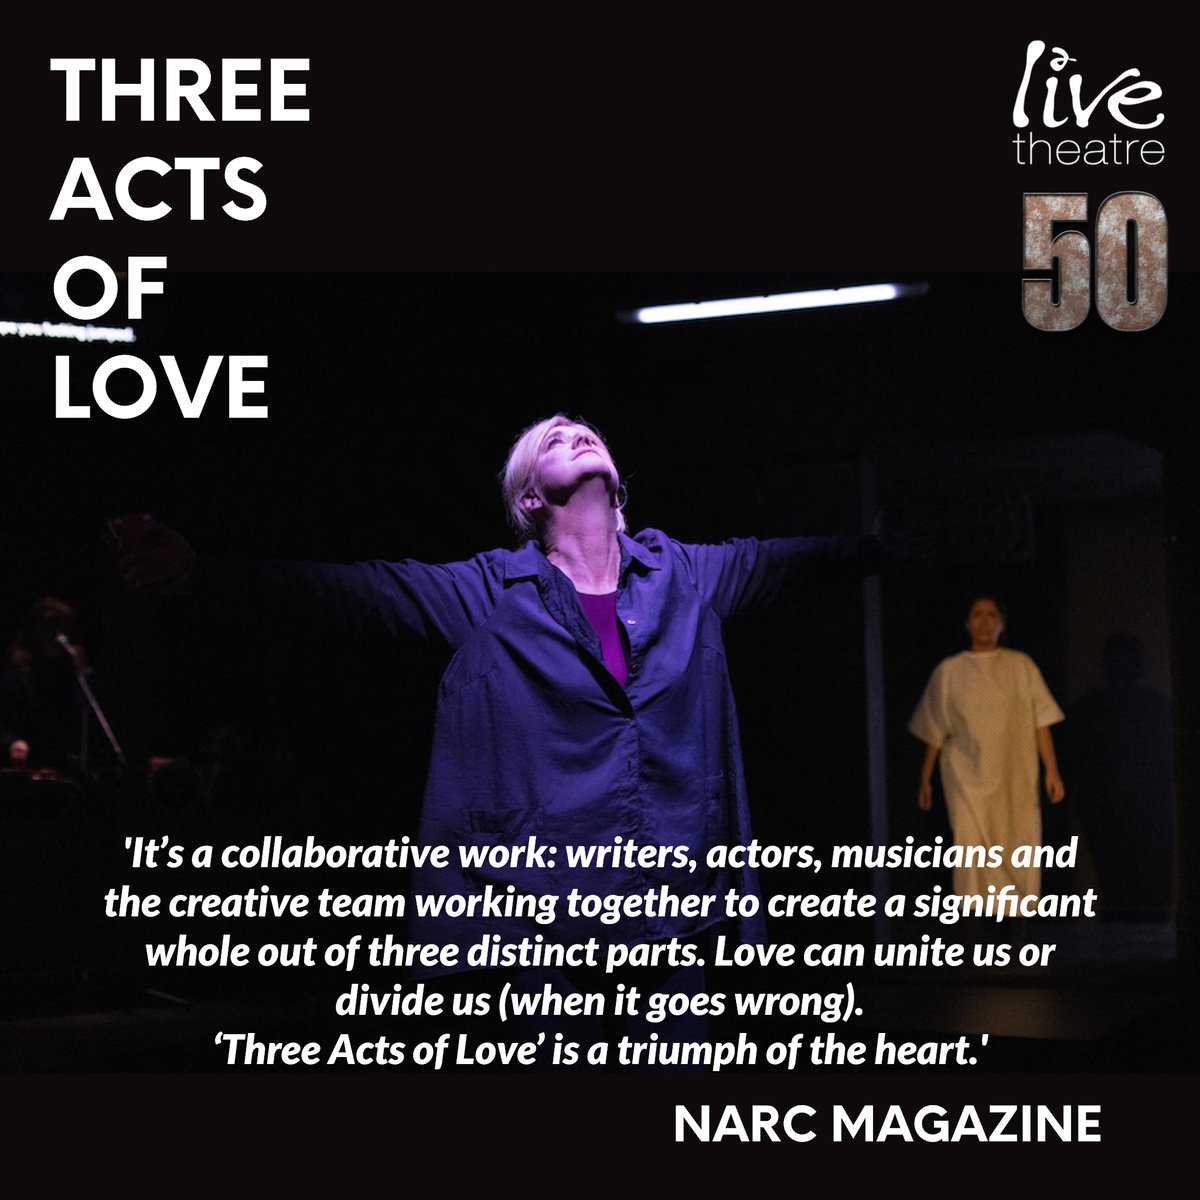 There are only 4 more chances to see #ThreeActsOfLove our final main stage production of our 50th birthday year! End this Sat 16 Dec.  Don't miss this trio of short plays with music exploring that complex emotion ❤️❤️❤️
Get your tickets asap at bit.ly/3BD9iul